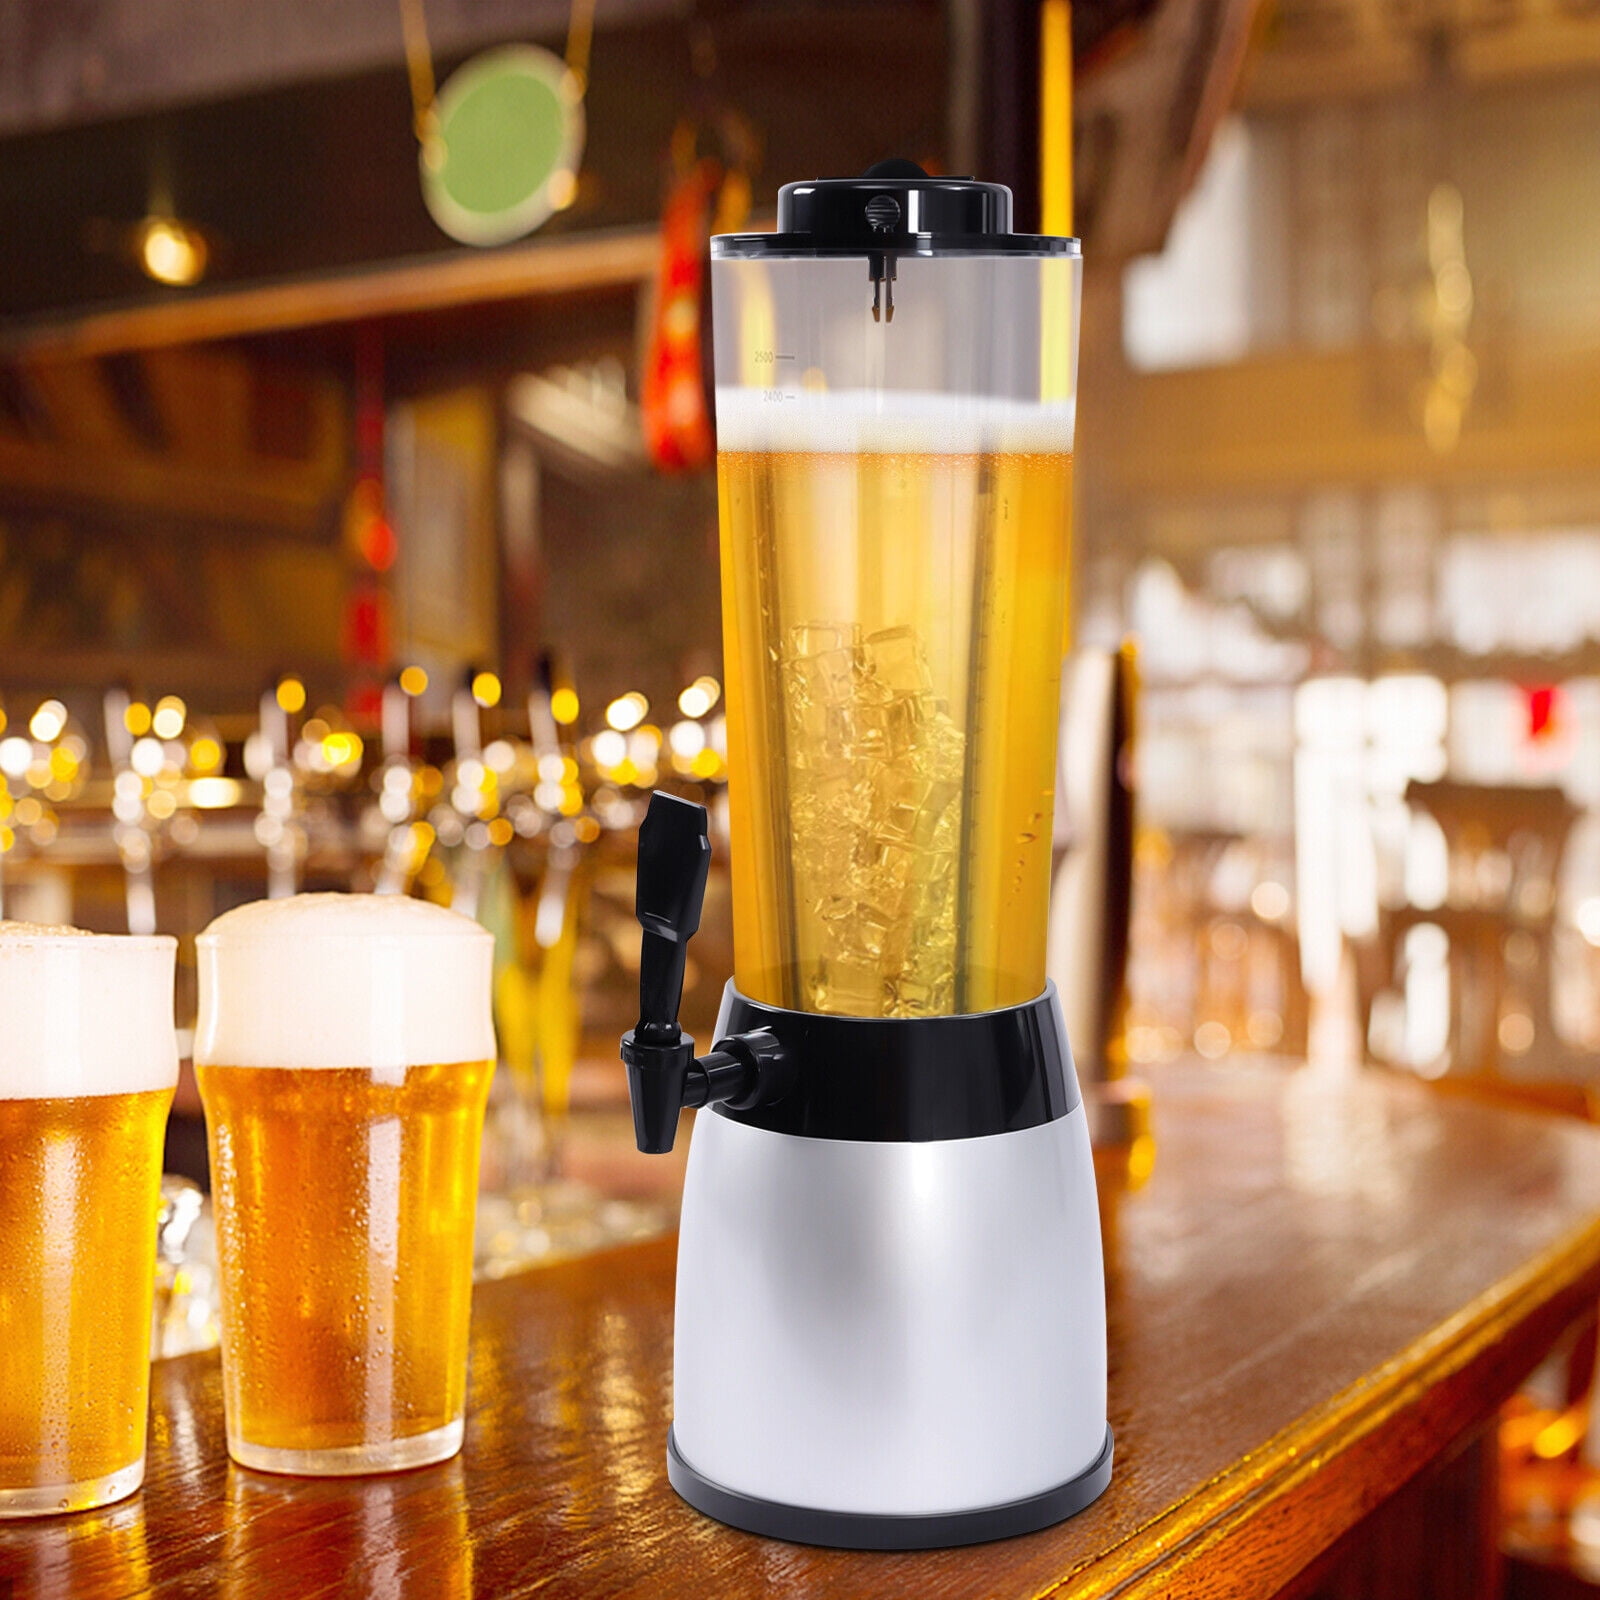 OUKANING 3L Beer Tower Dispenser Drink Container Wine Beer Milk